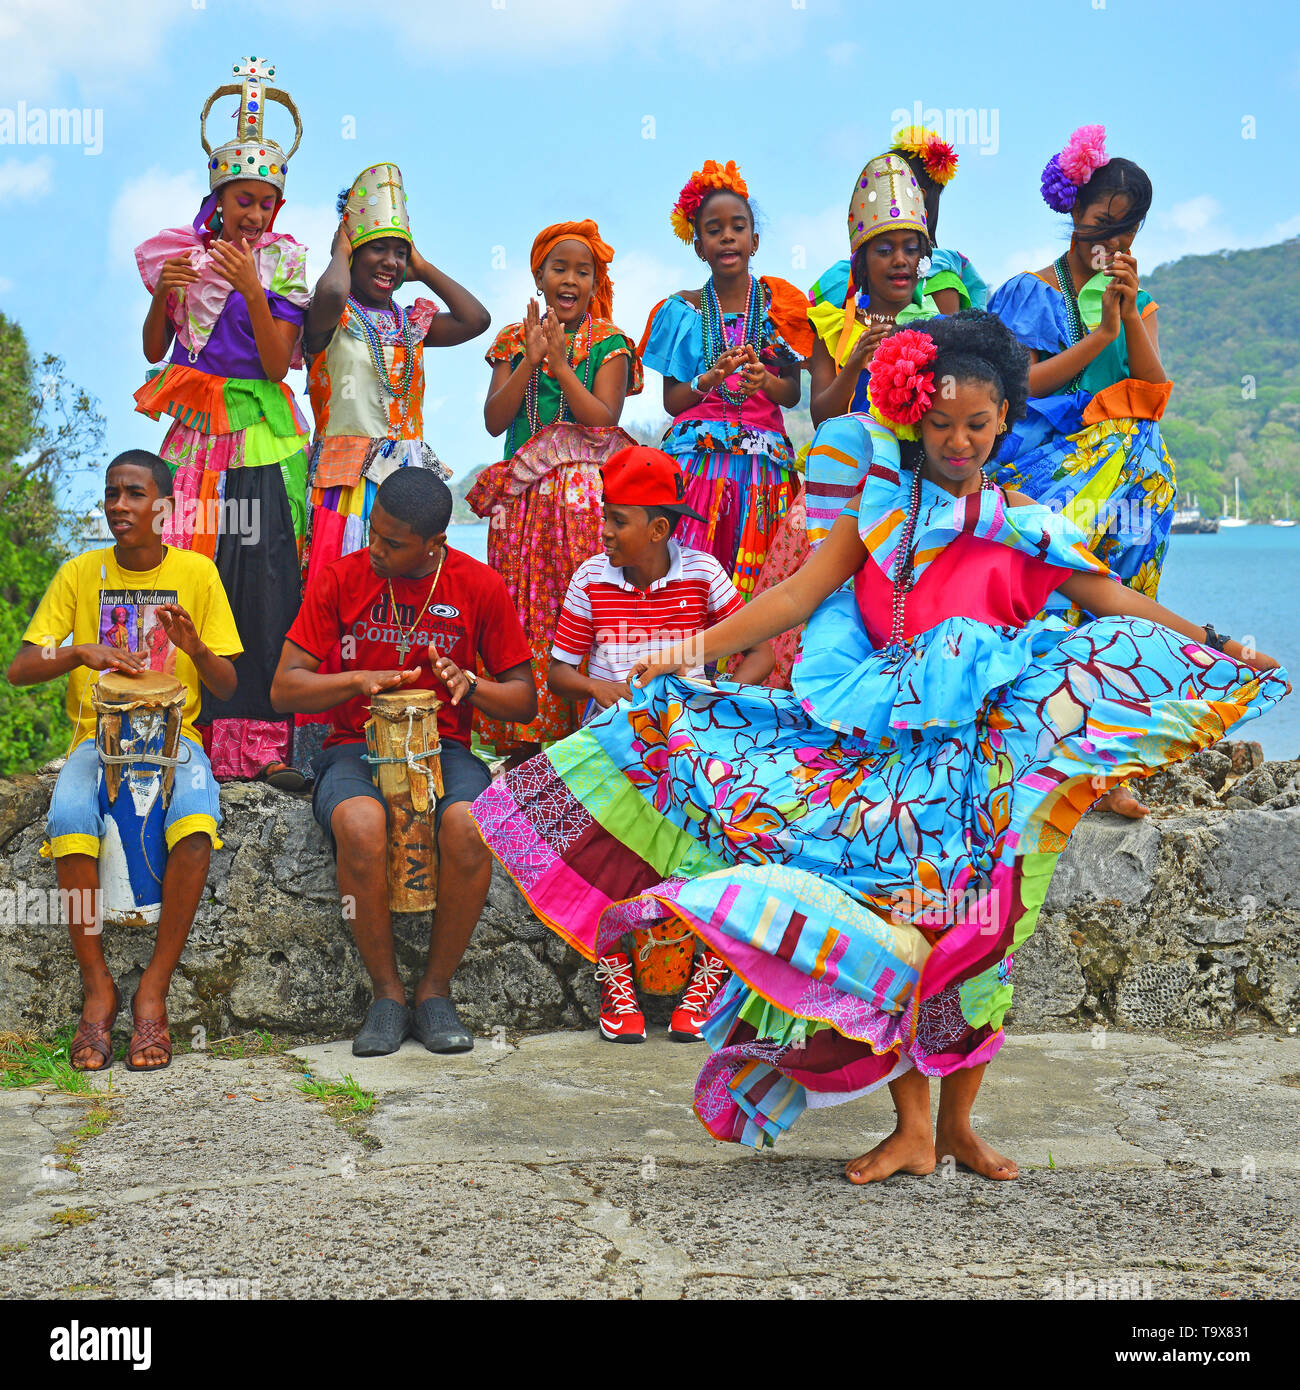 Young Panama people performing the traditional Congo dance with music instruments in an ancient spanish fortress, Portobelo, Panama, Central America. Stock Photo